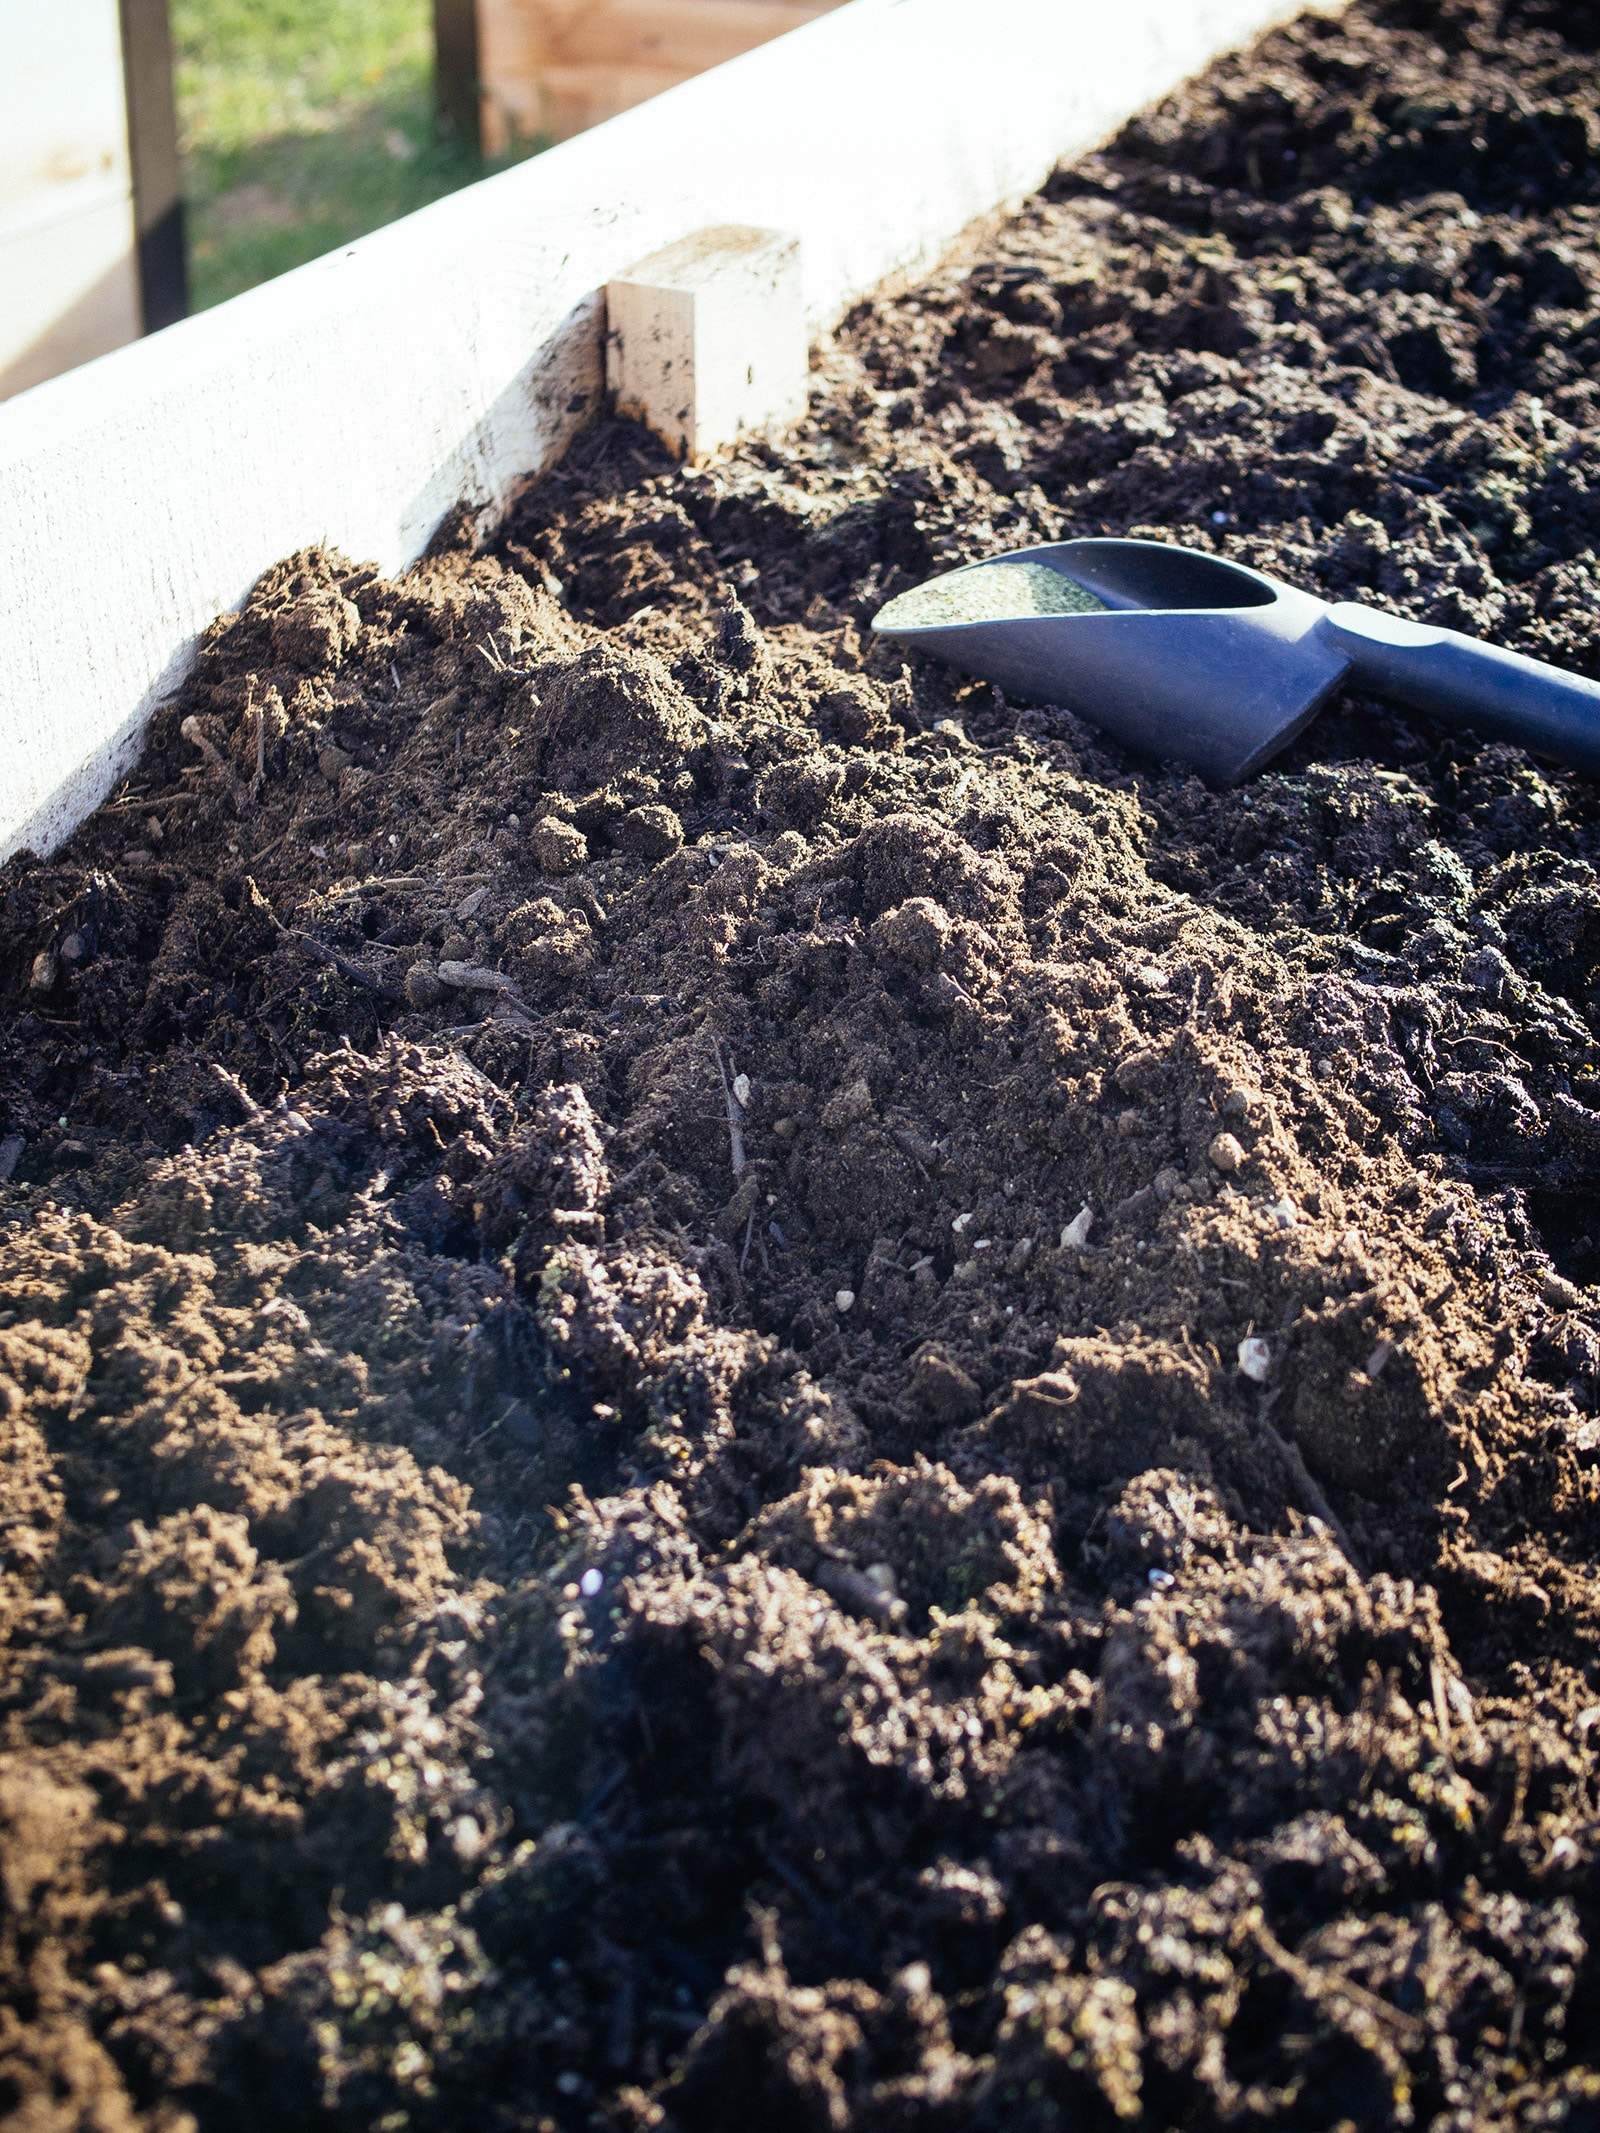 Close-up of soil amended with fertilizer with a trowel in the background